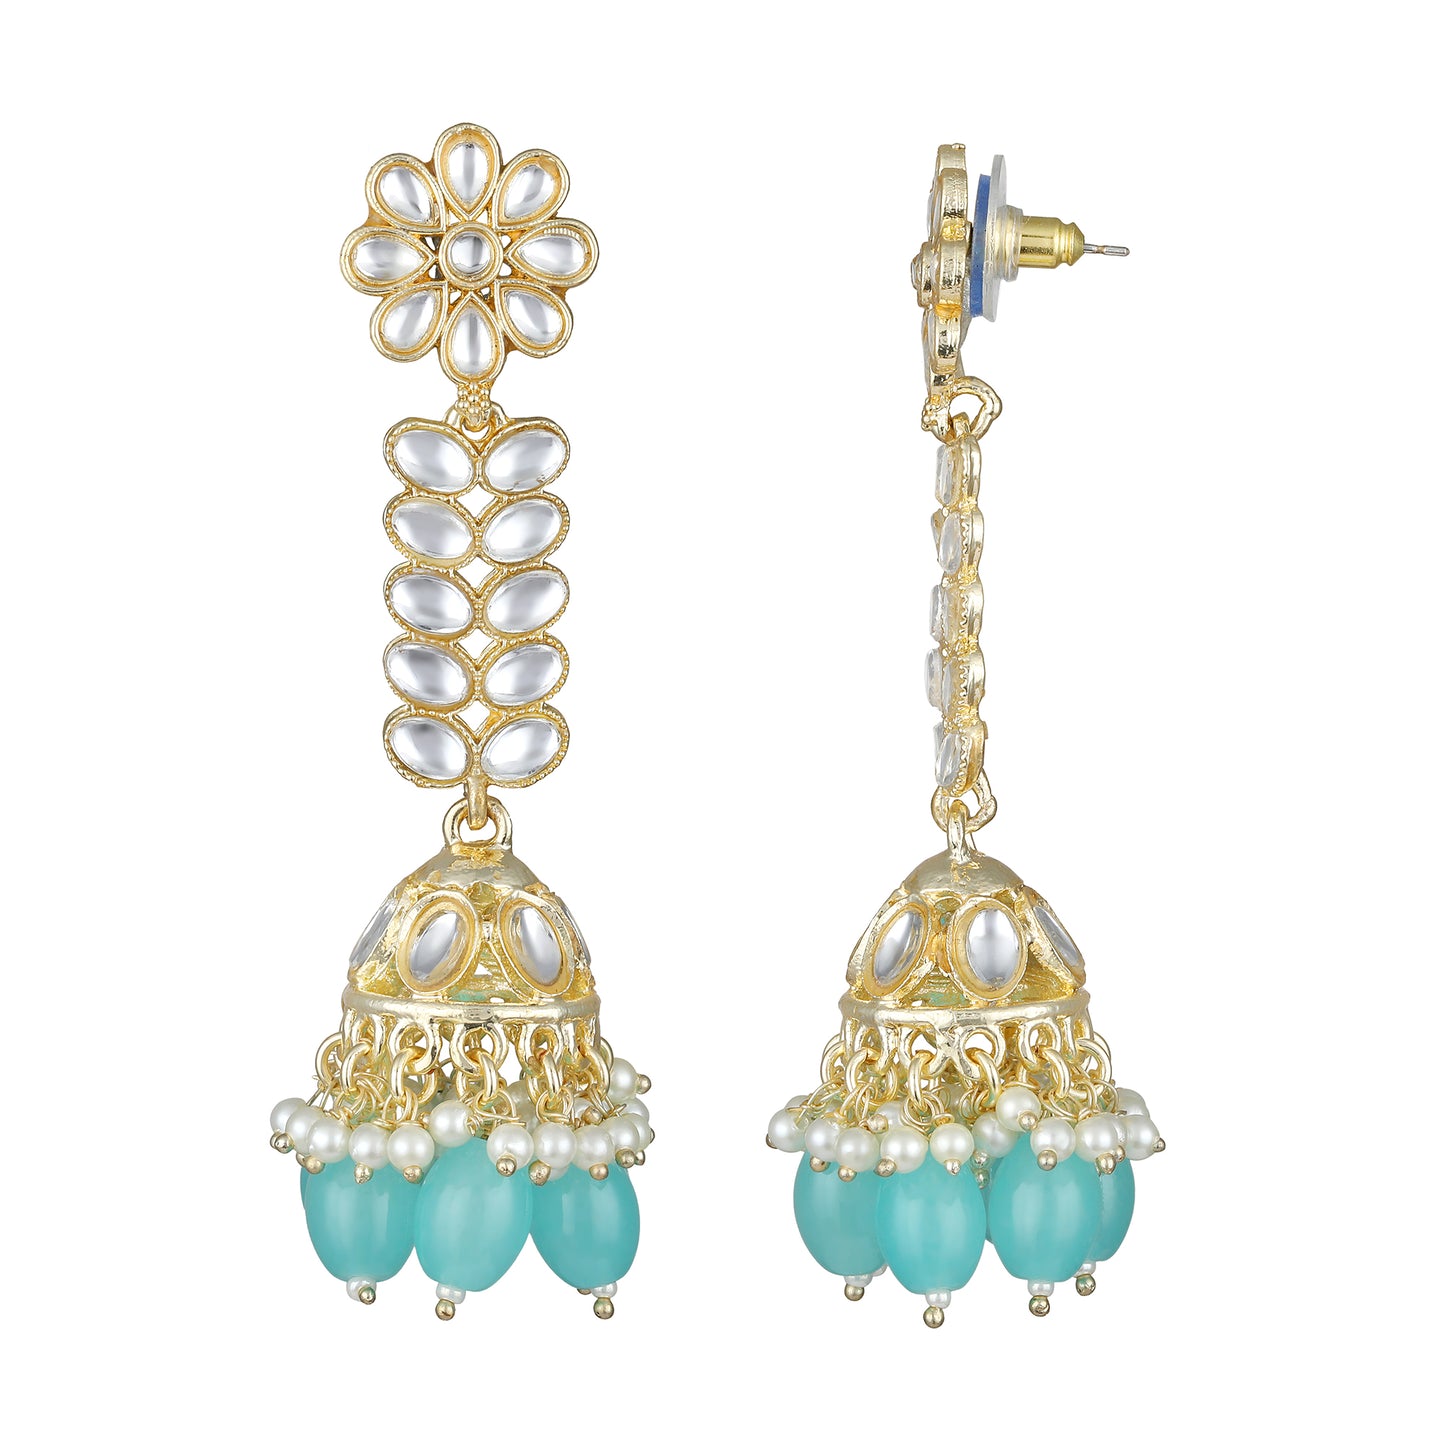 Bdiva 18K Gold Plated Turquiose Earrings with Semi Cultured Pearls